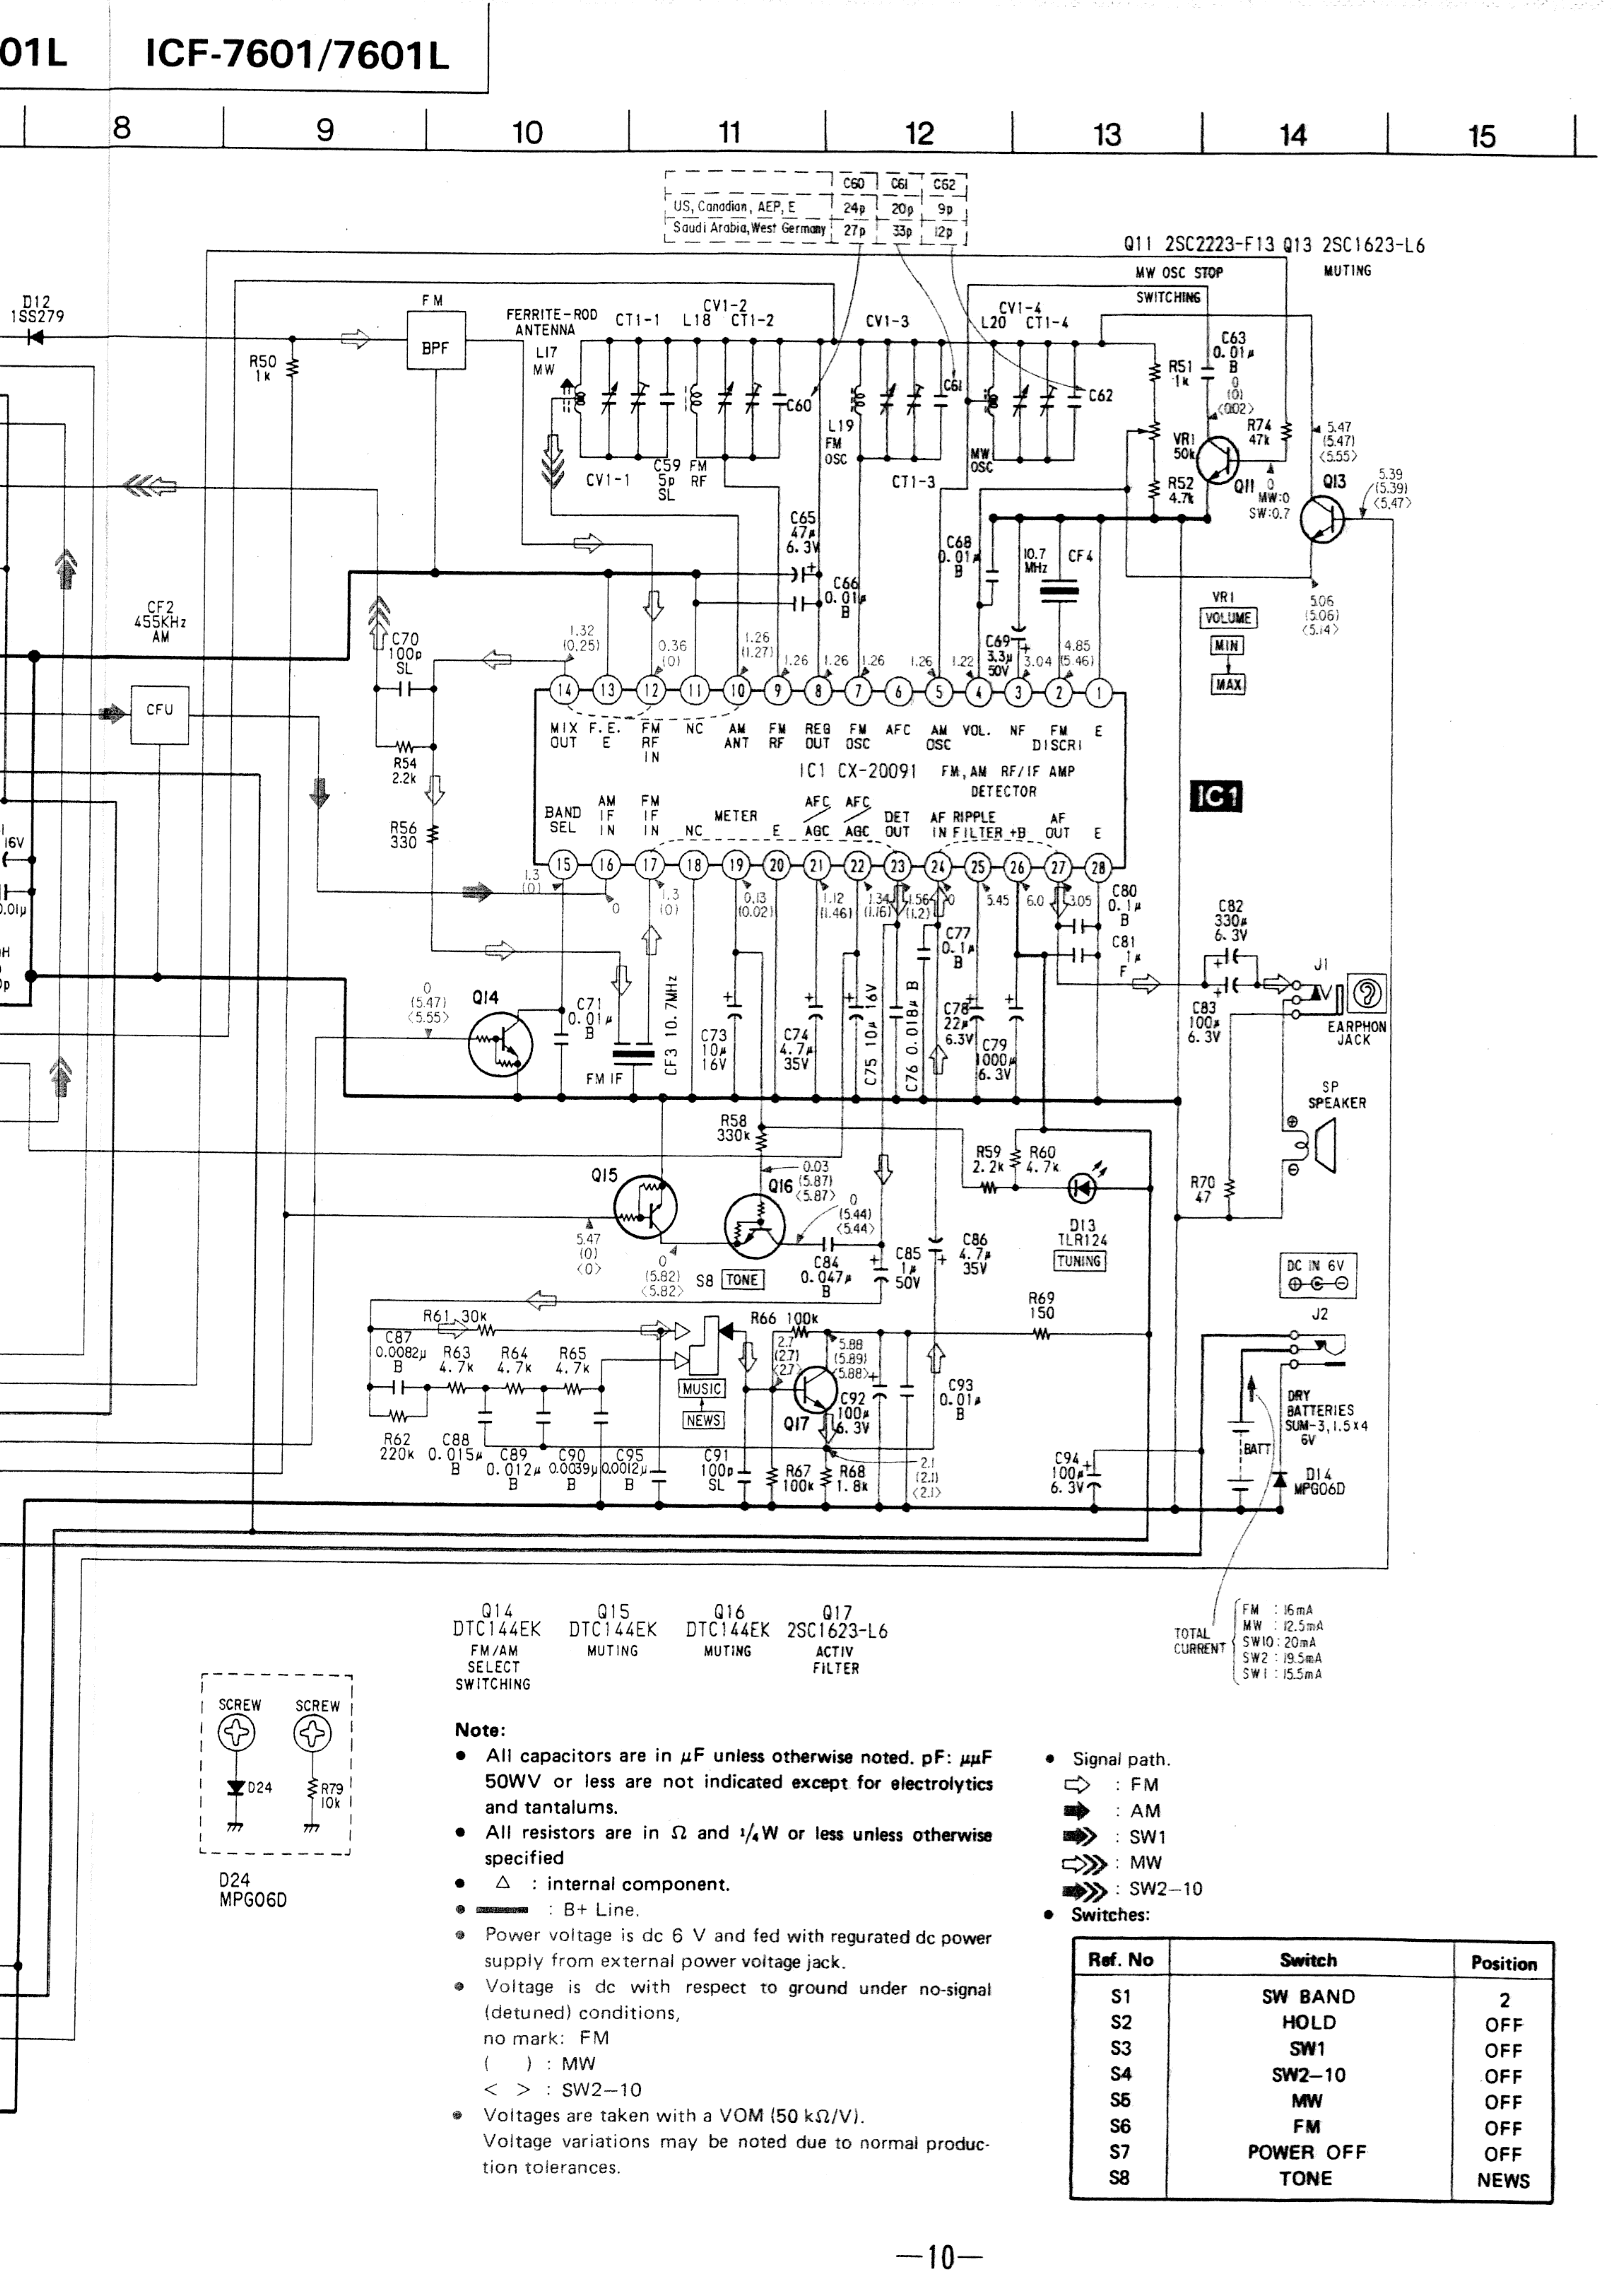 Sony ICF-7601 Schematic for ICF-7601, right part